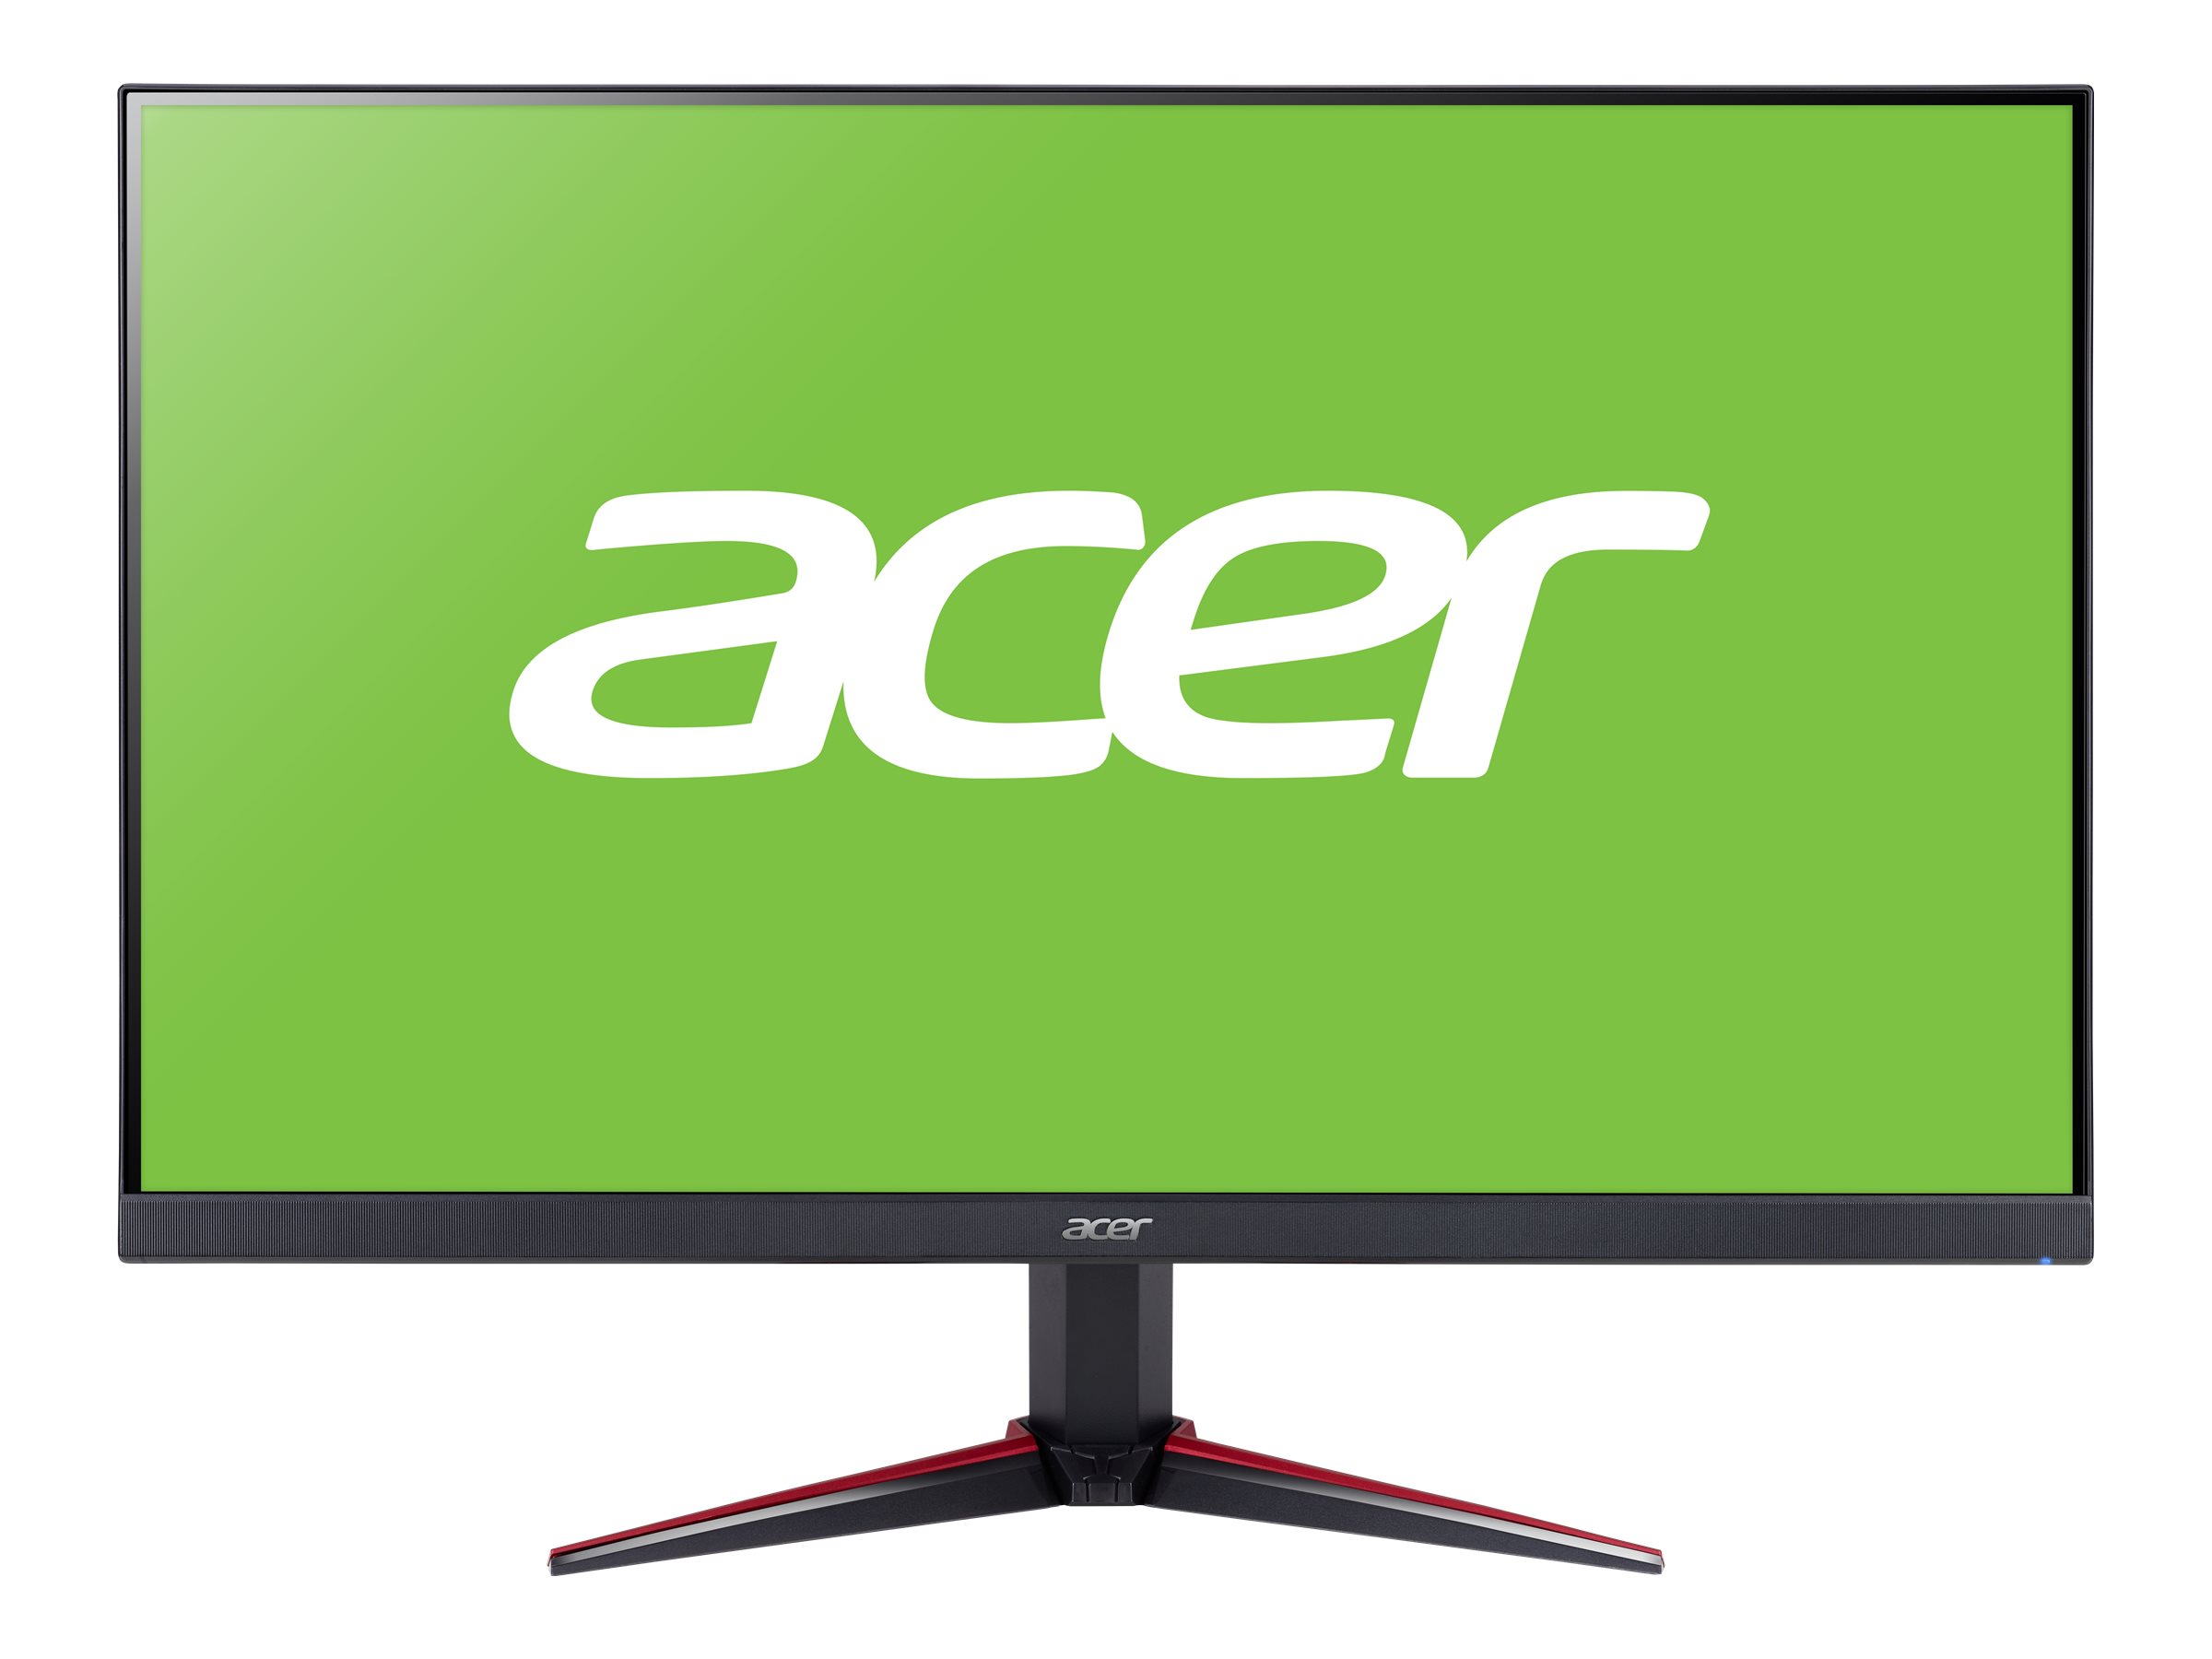 Acer Nitro VG240Y Abi 23.8inch Full HD LED Monitor- Black - 111A9P - Open  Box or Display Models Only